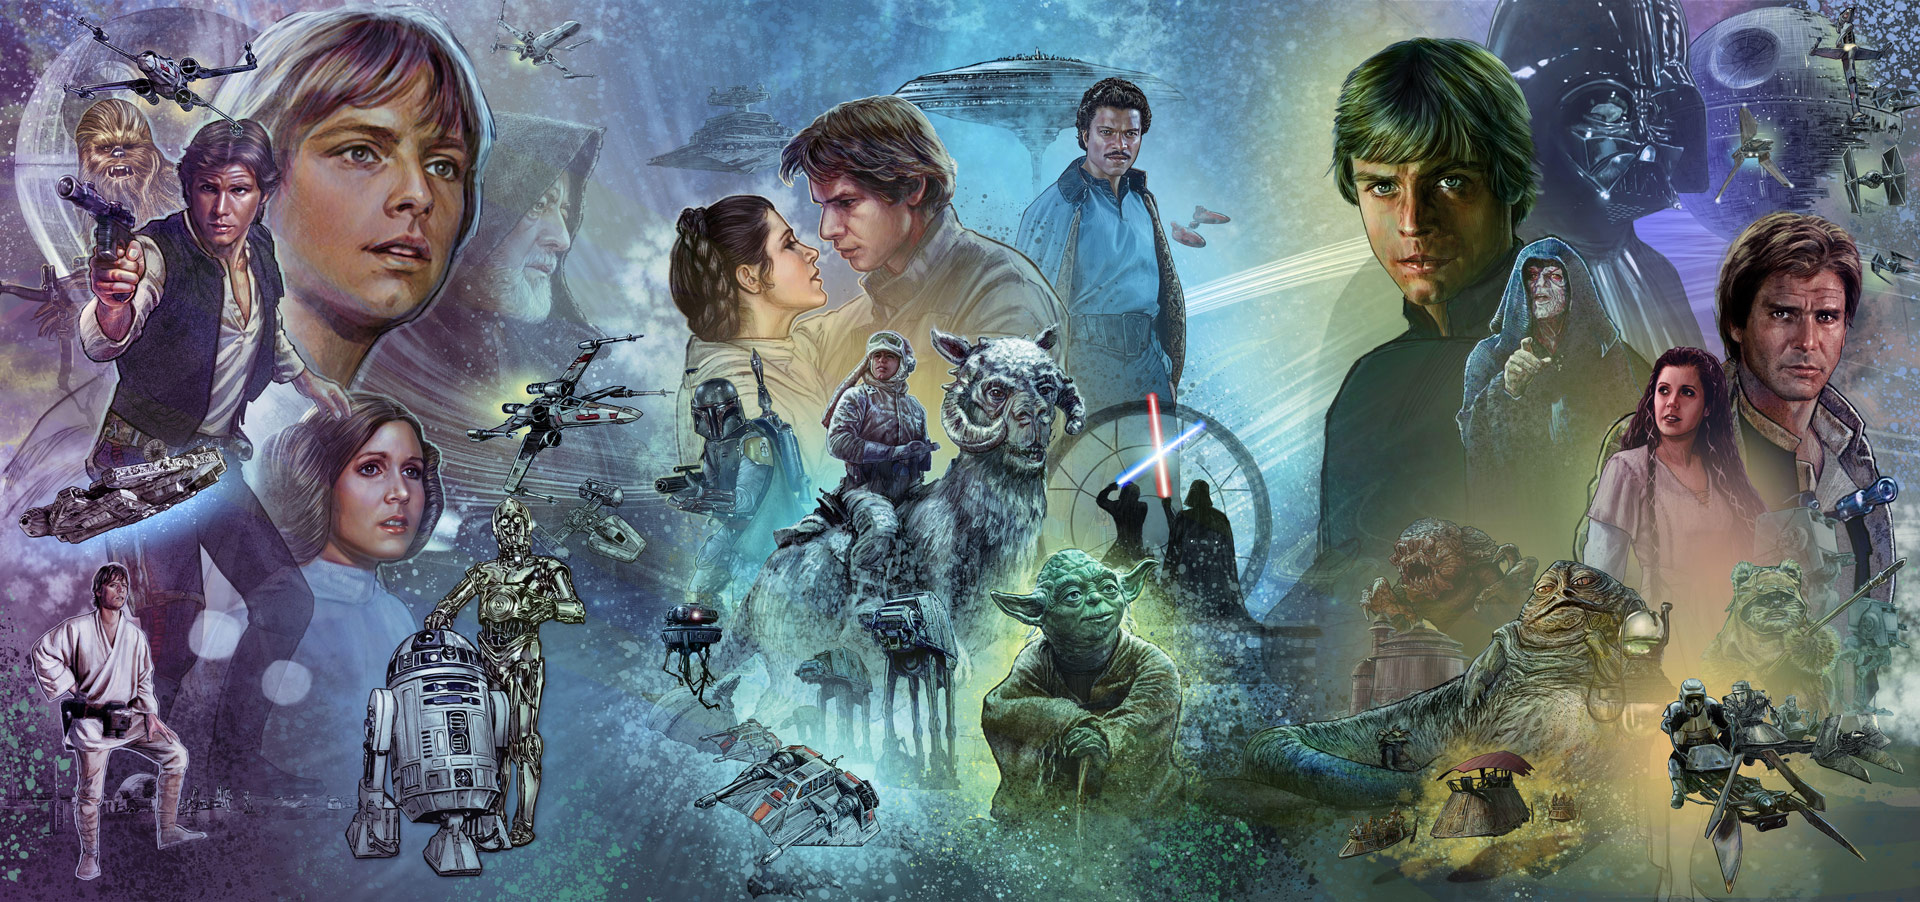 Star Wars Launches New Ultimate Studio Edition Collectibles Line